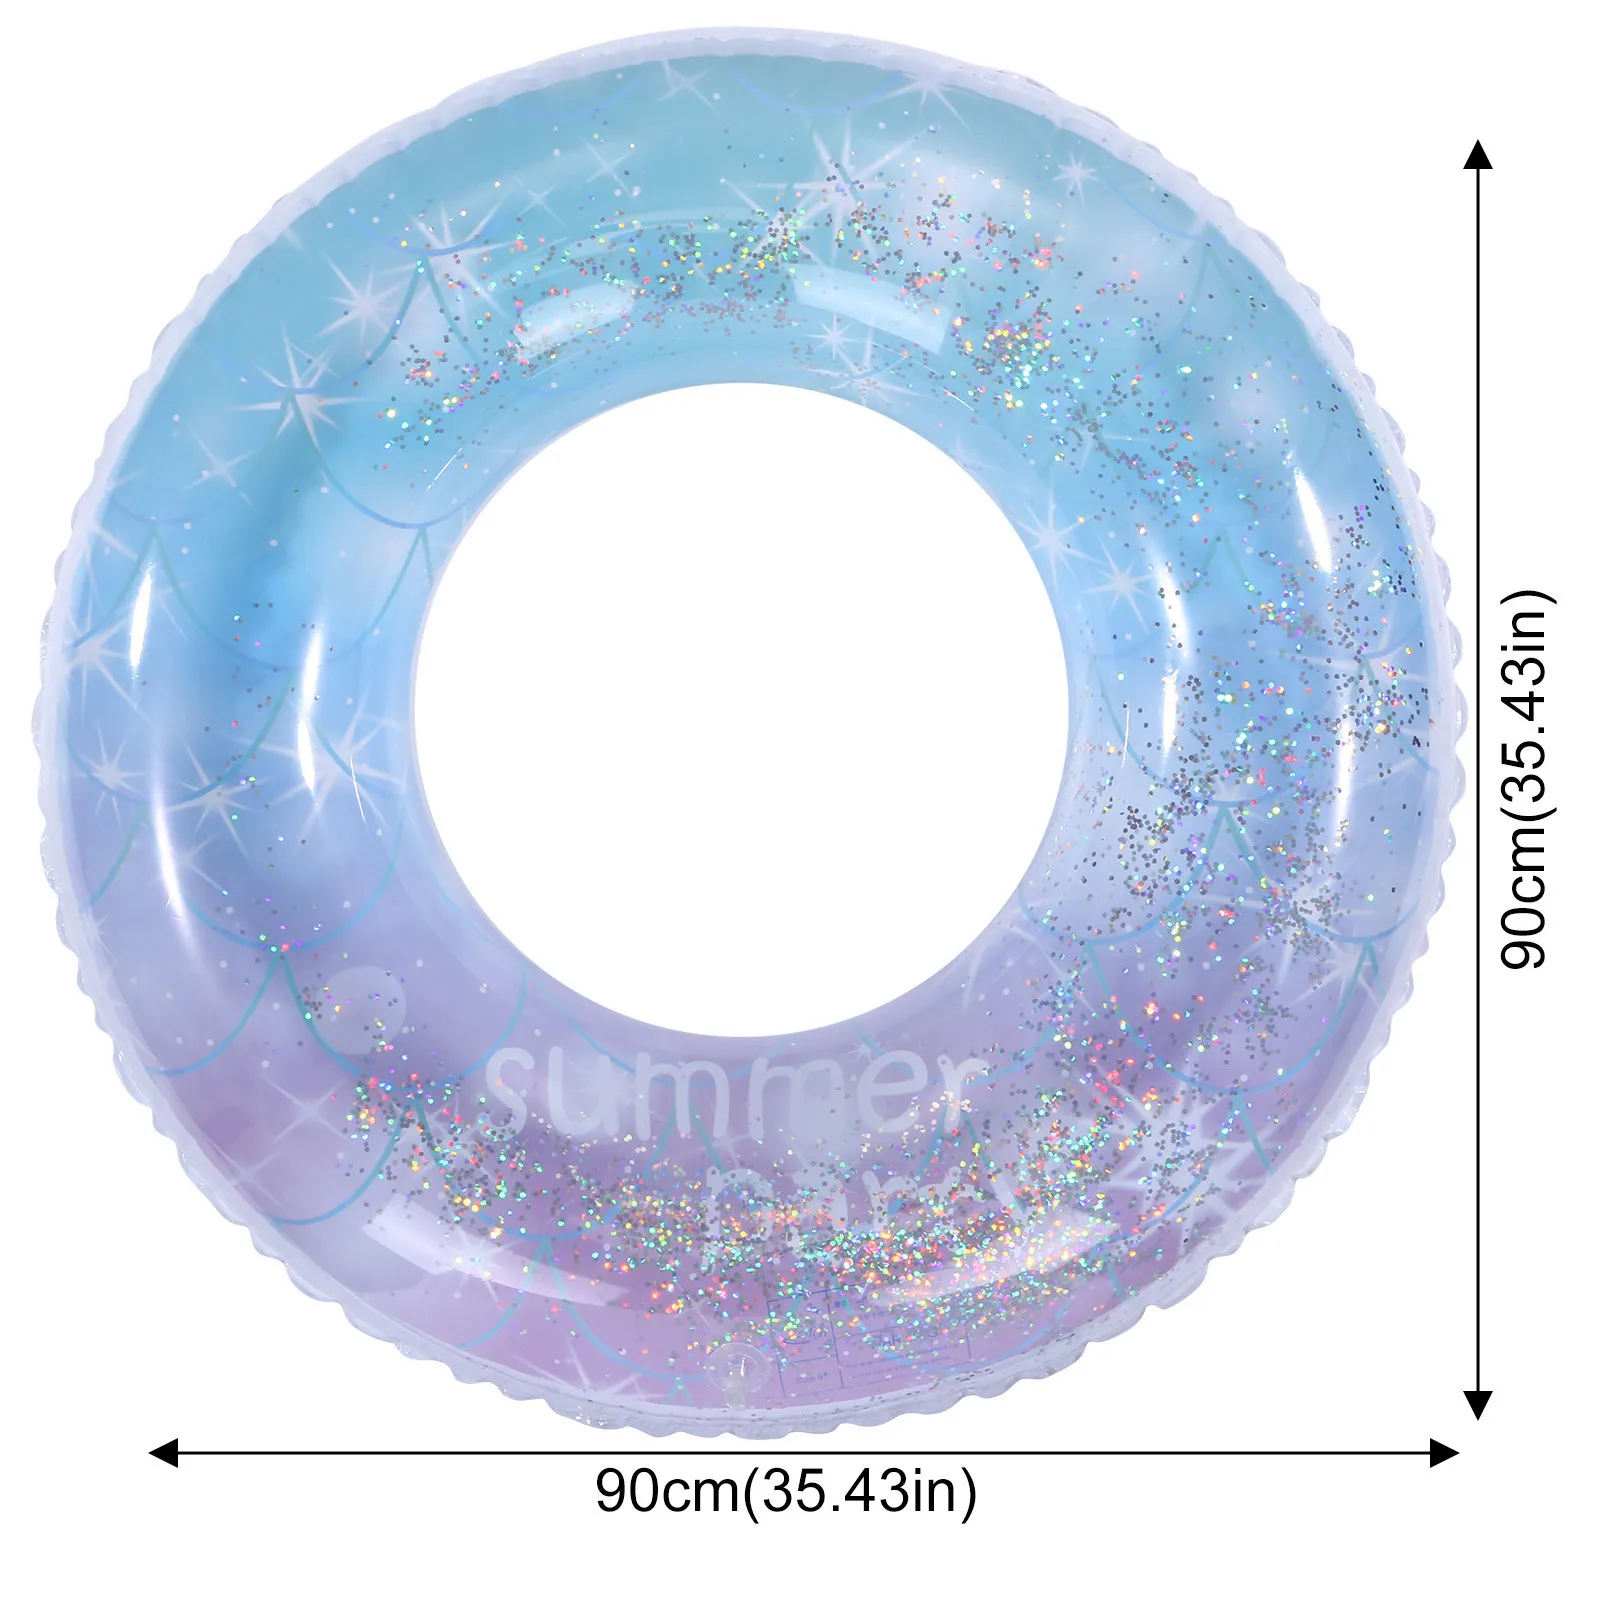 

Summer Seat Ring Toy Buoy Mattress Thickened Pvc Summer Float Toy Circle Outdoor Activities Inflatable Donut Swimming Ring Pool